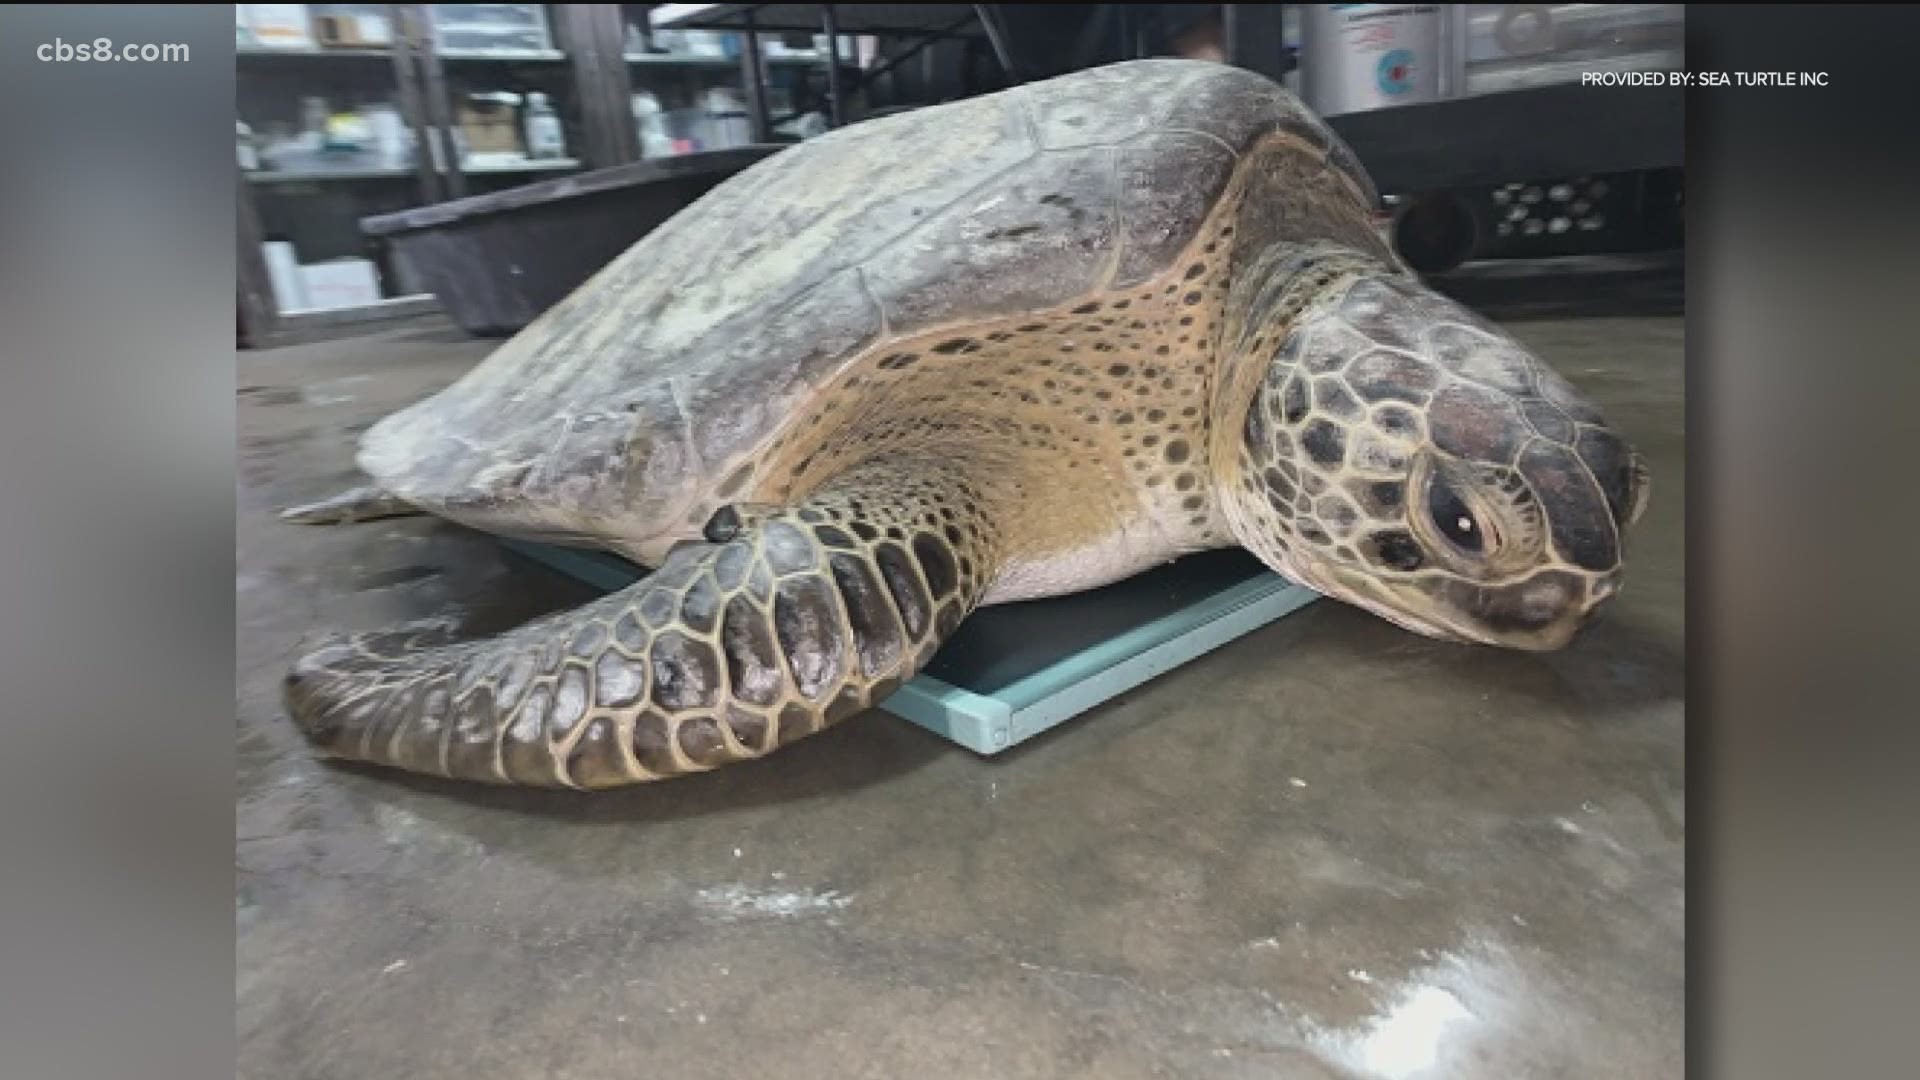 After dangerously cold temperatures moved through the southern United States, Starship, that last remaining turtle, should be ready for release in the coming weeks.